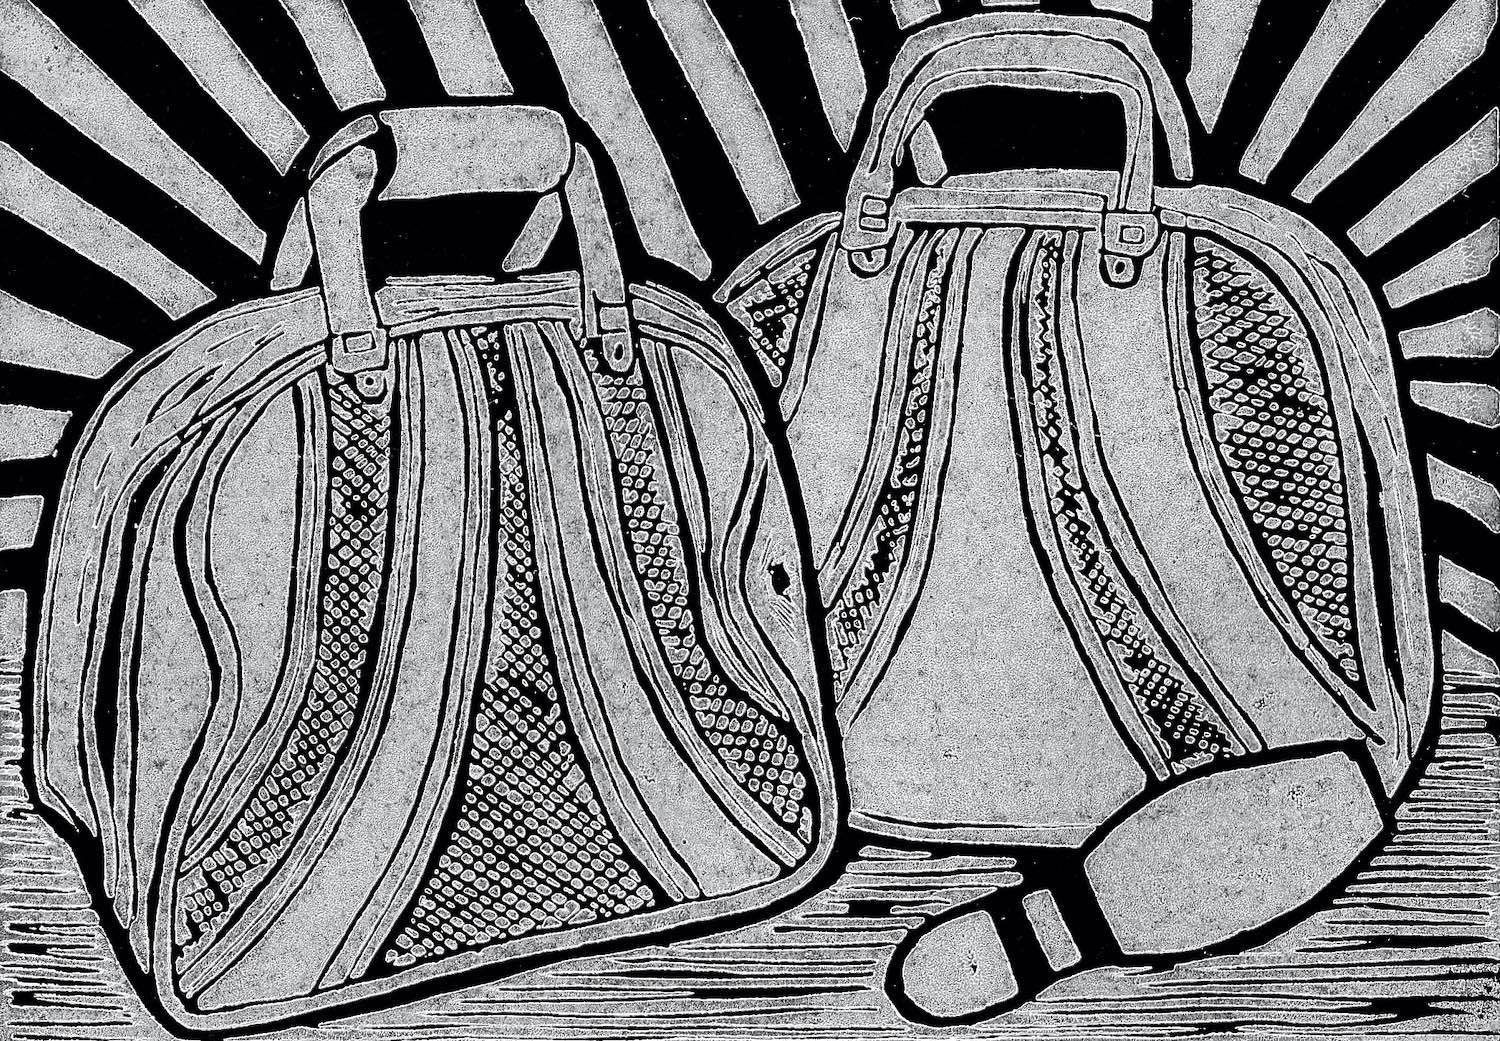 Block print of bowling bags by Charly Fasano.